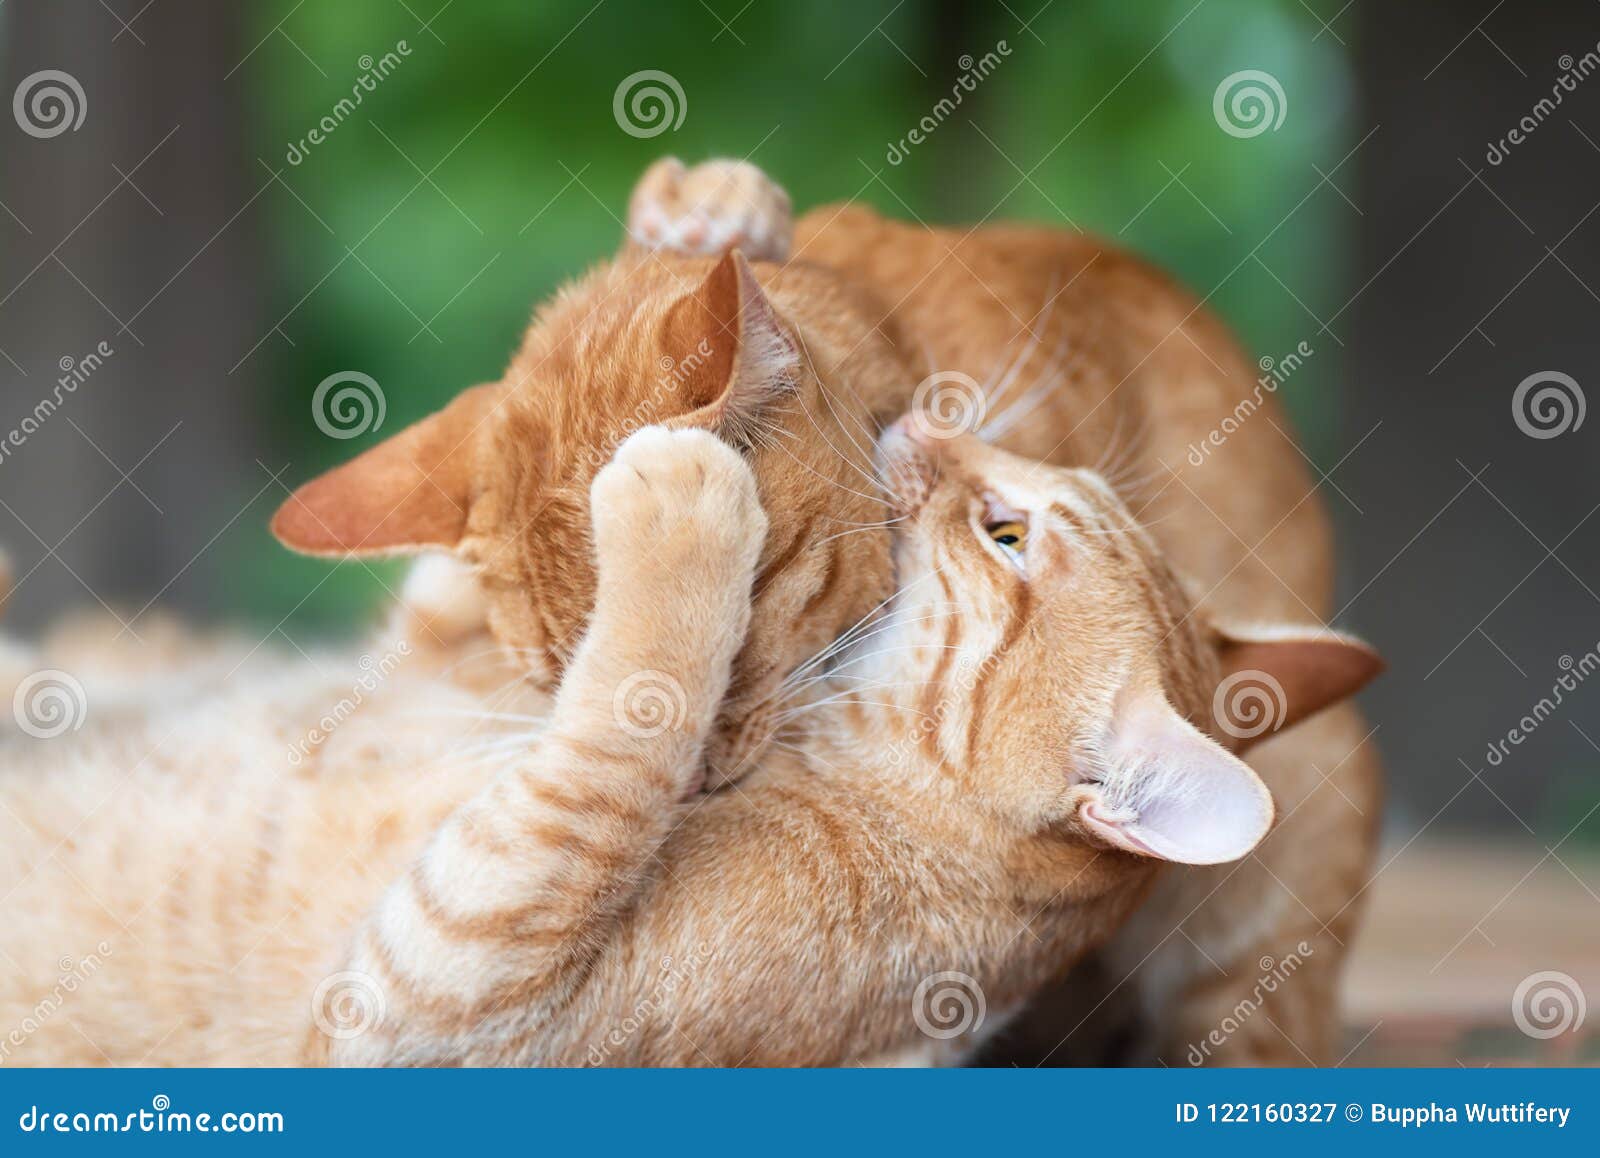 28 Best Photos Cats Playing Together Or Fighting / FUNNY CATS PLAYING FIGHTING WRESTLING TOGETHER | Cats Best ...